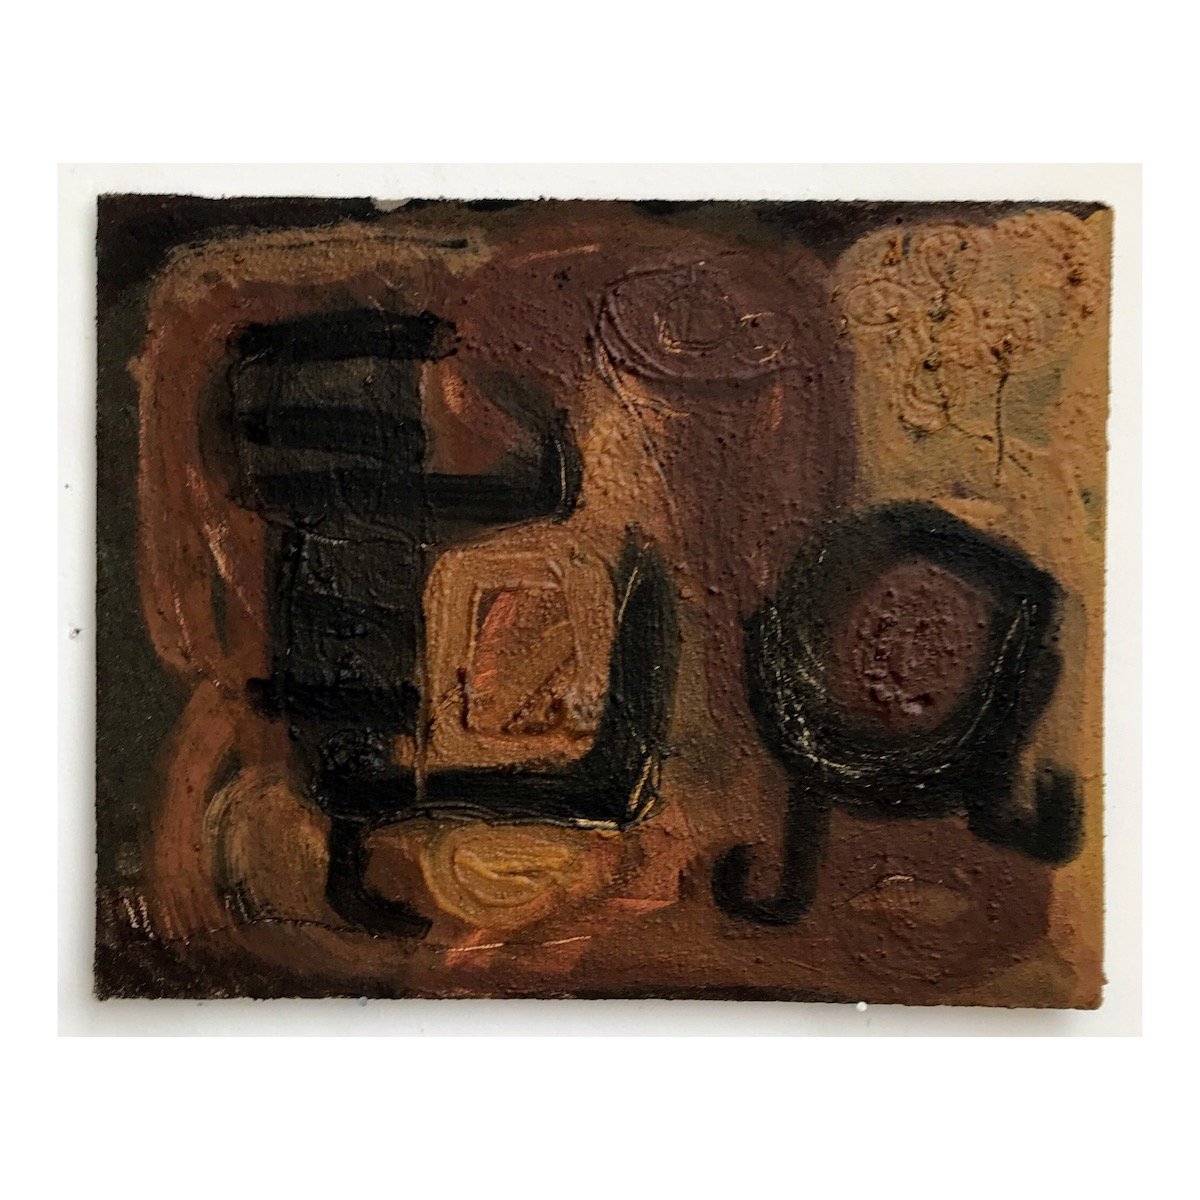 058 kicking the goose  (Cornish earth pigments and linseed oil on primed salvaged board; 30x23cm)